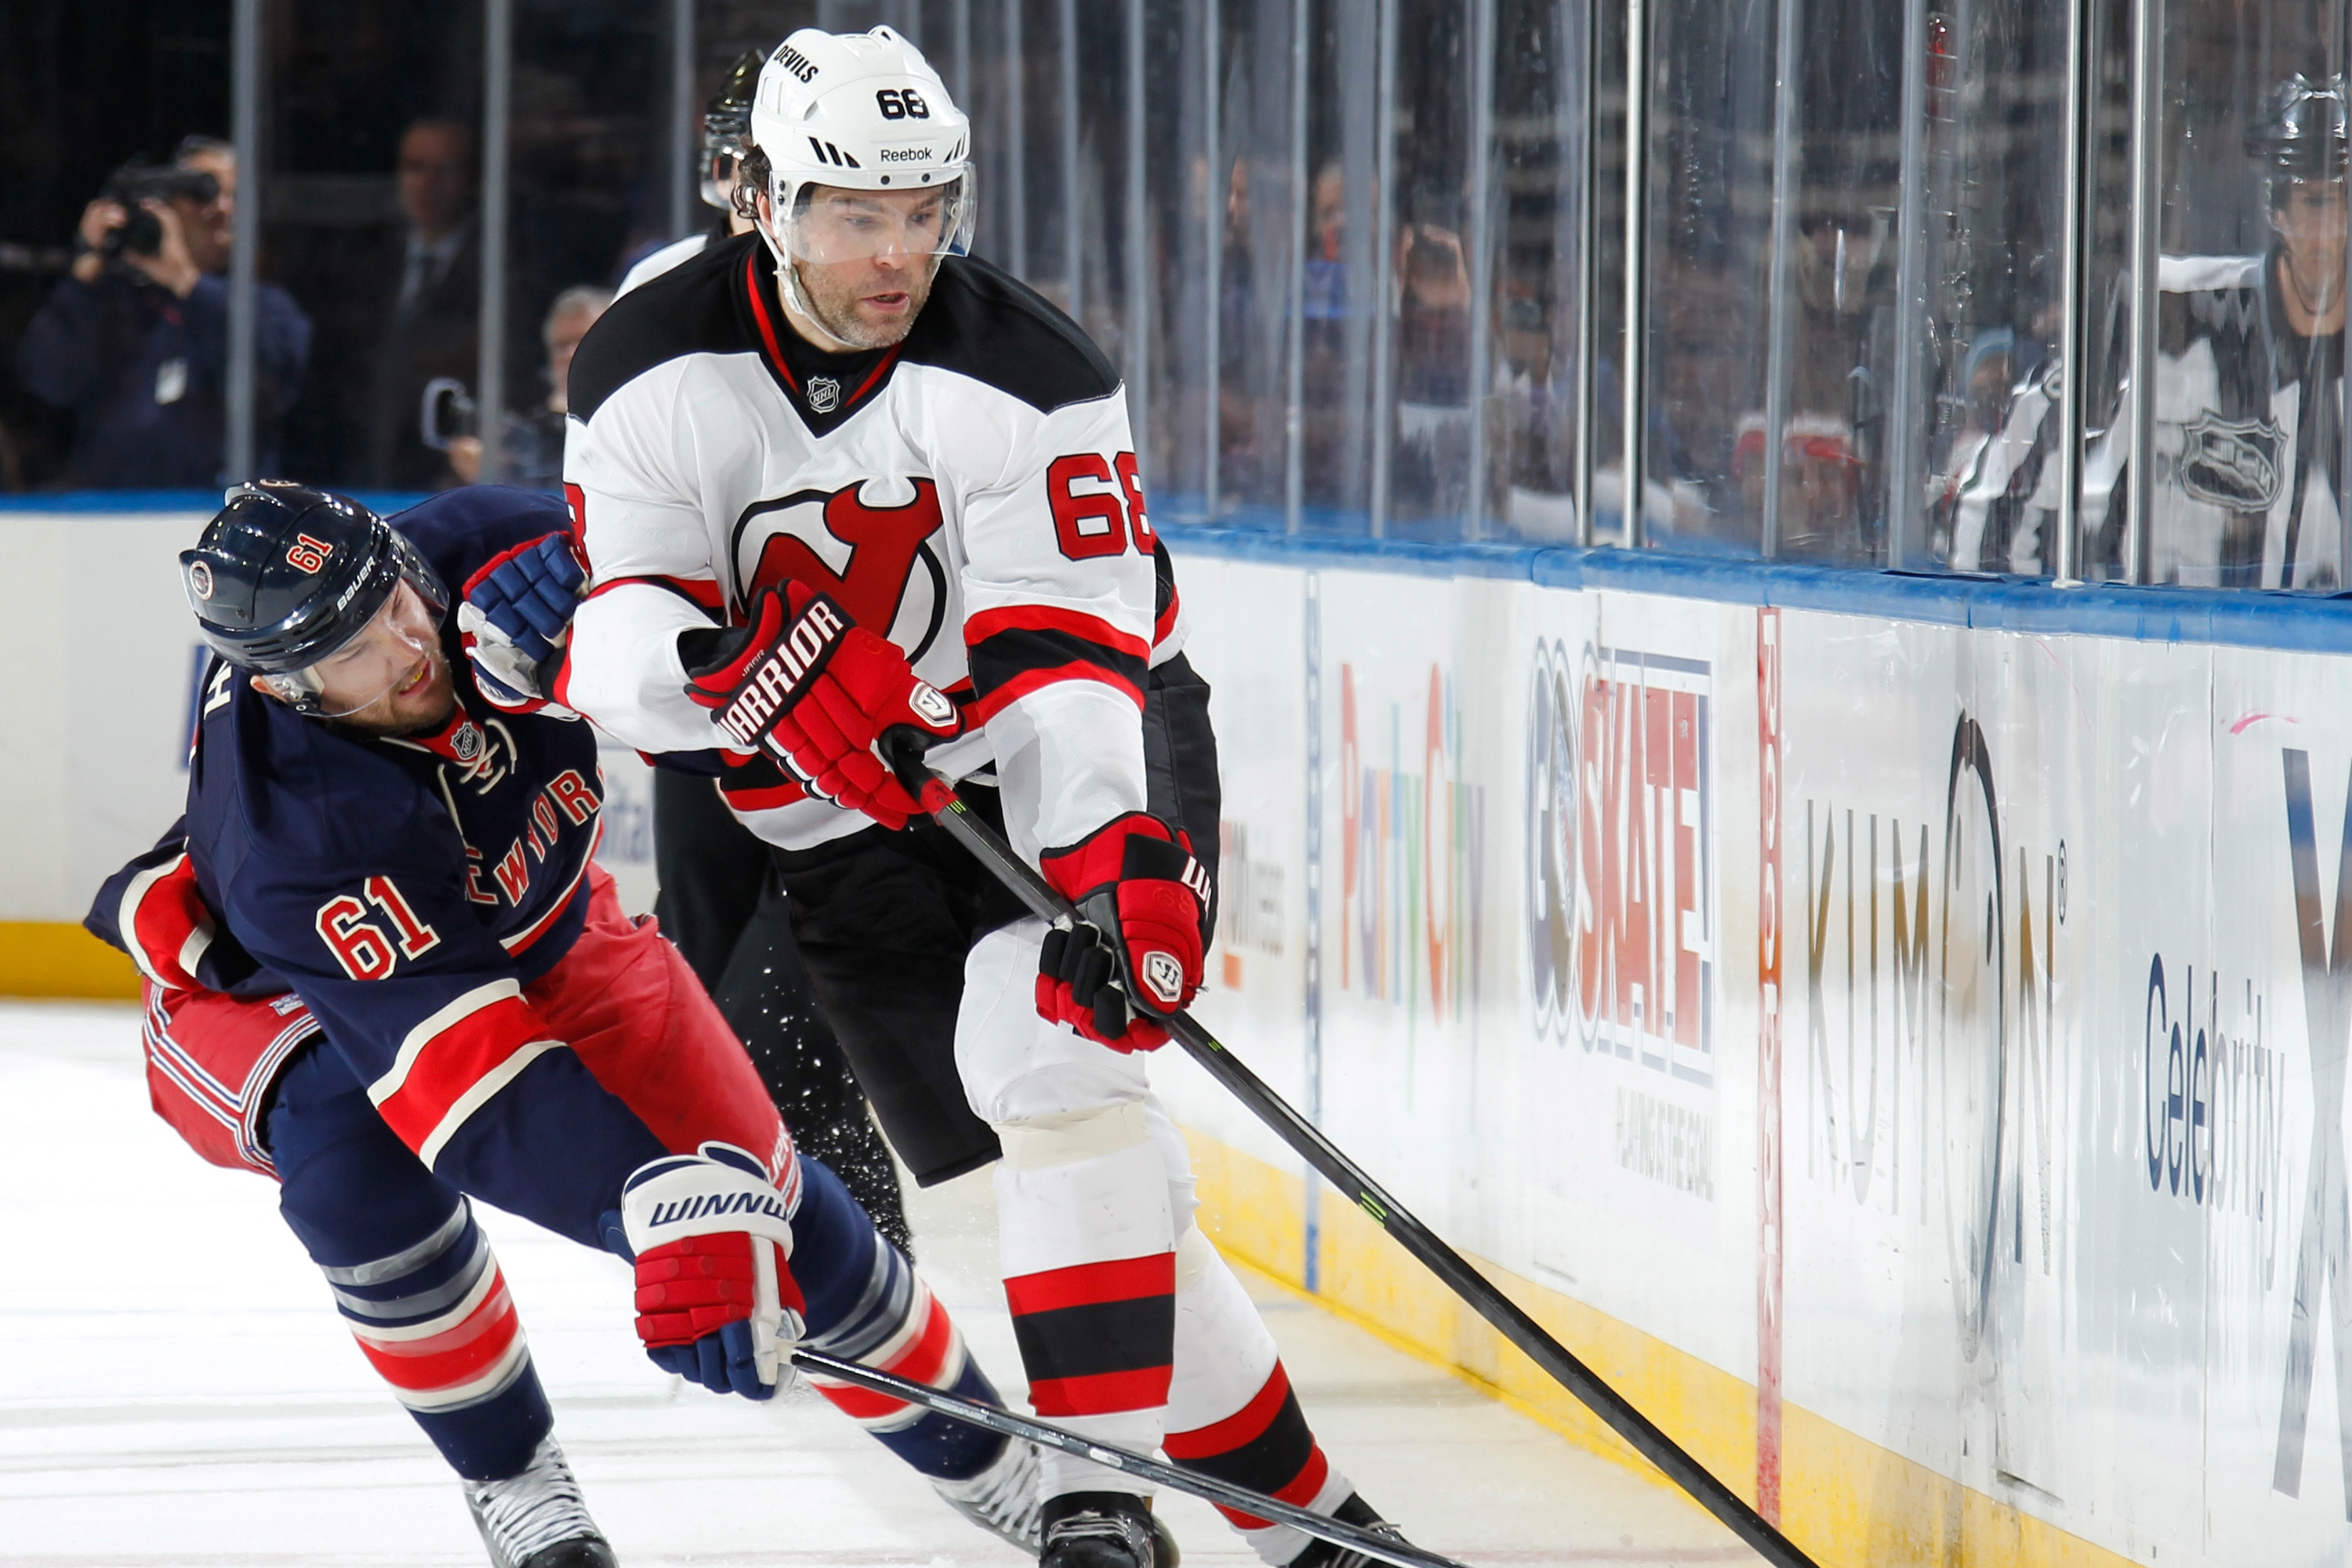 The NJ Devils Have an Icon Playing for Them in Jaromir Jagr [VIDEO]